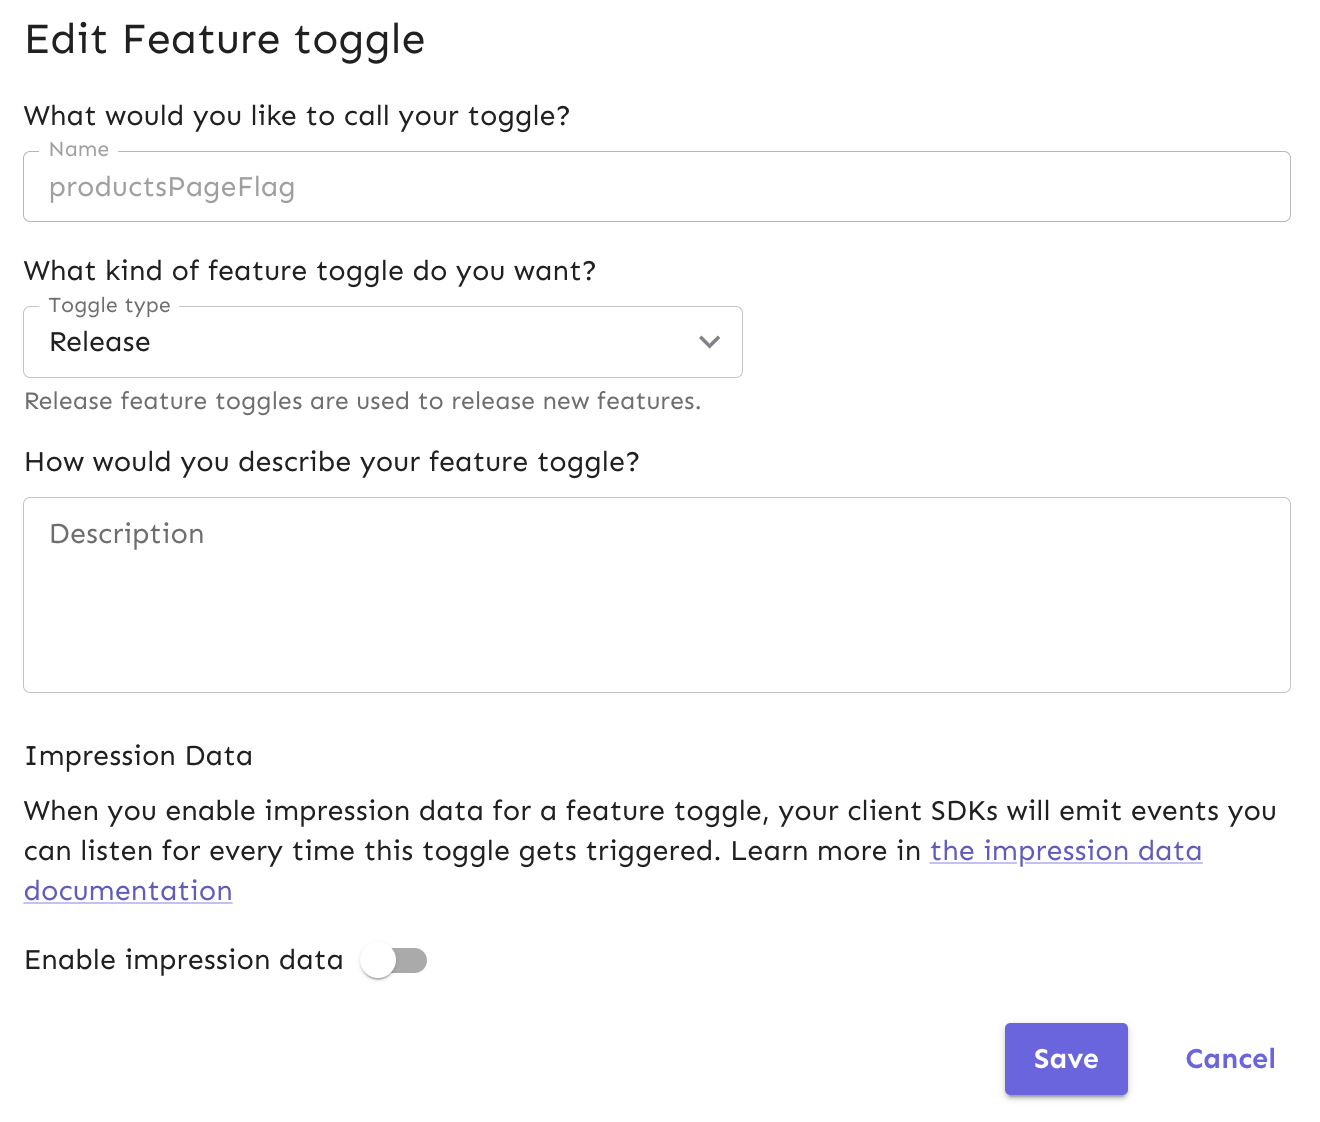 Enable impression data by turning the toggle on in the form.